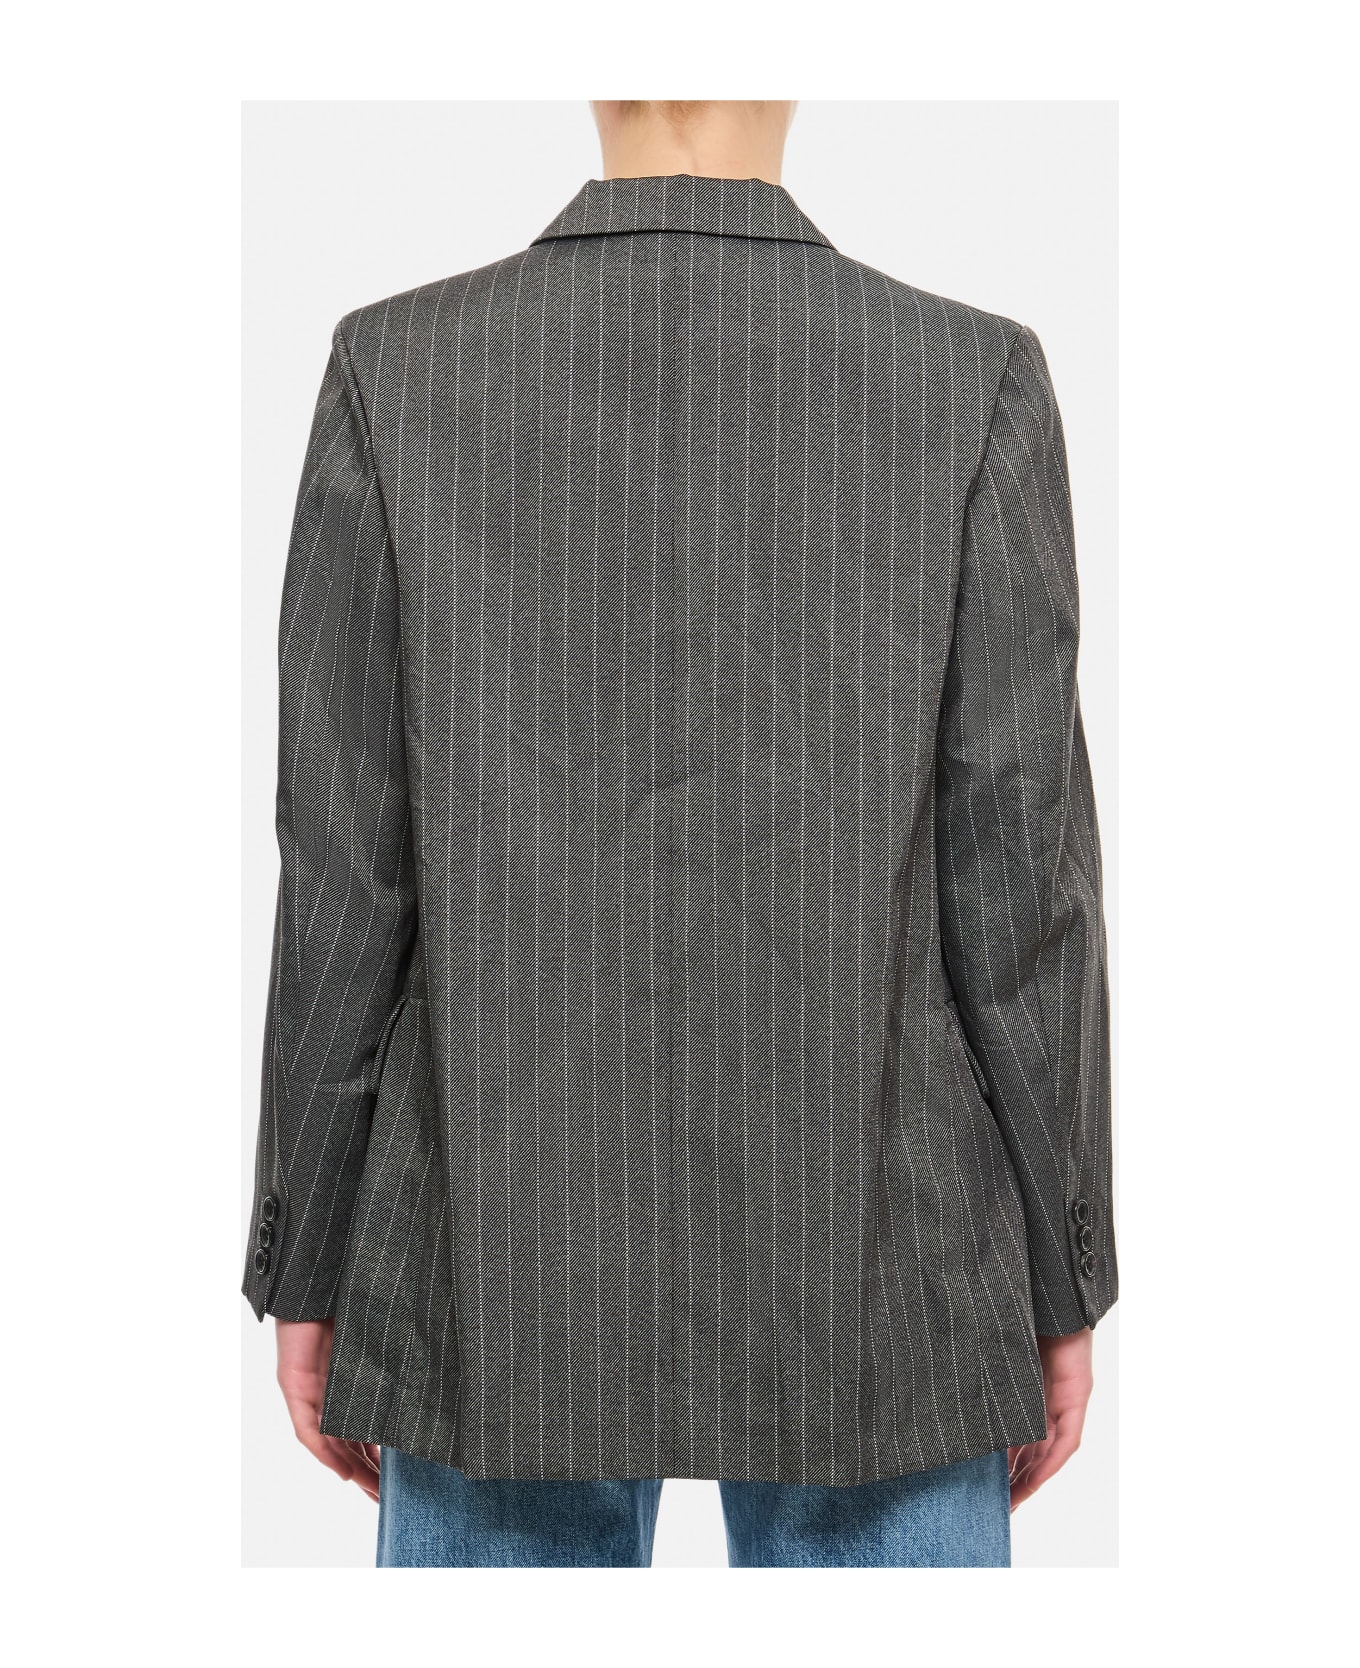 Comme des Garçons Single Breasted Open Jacket - Grey ブレザー